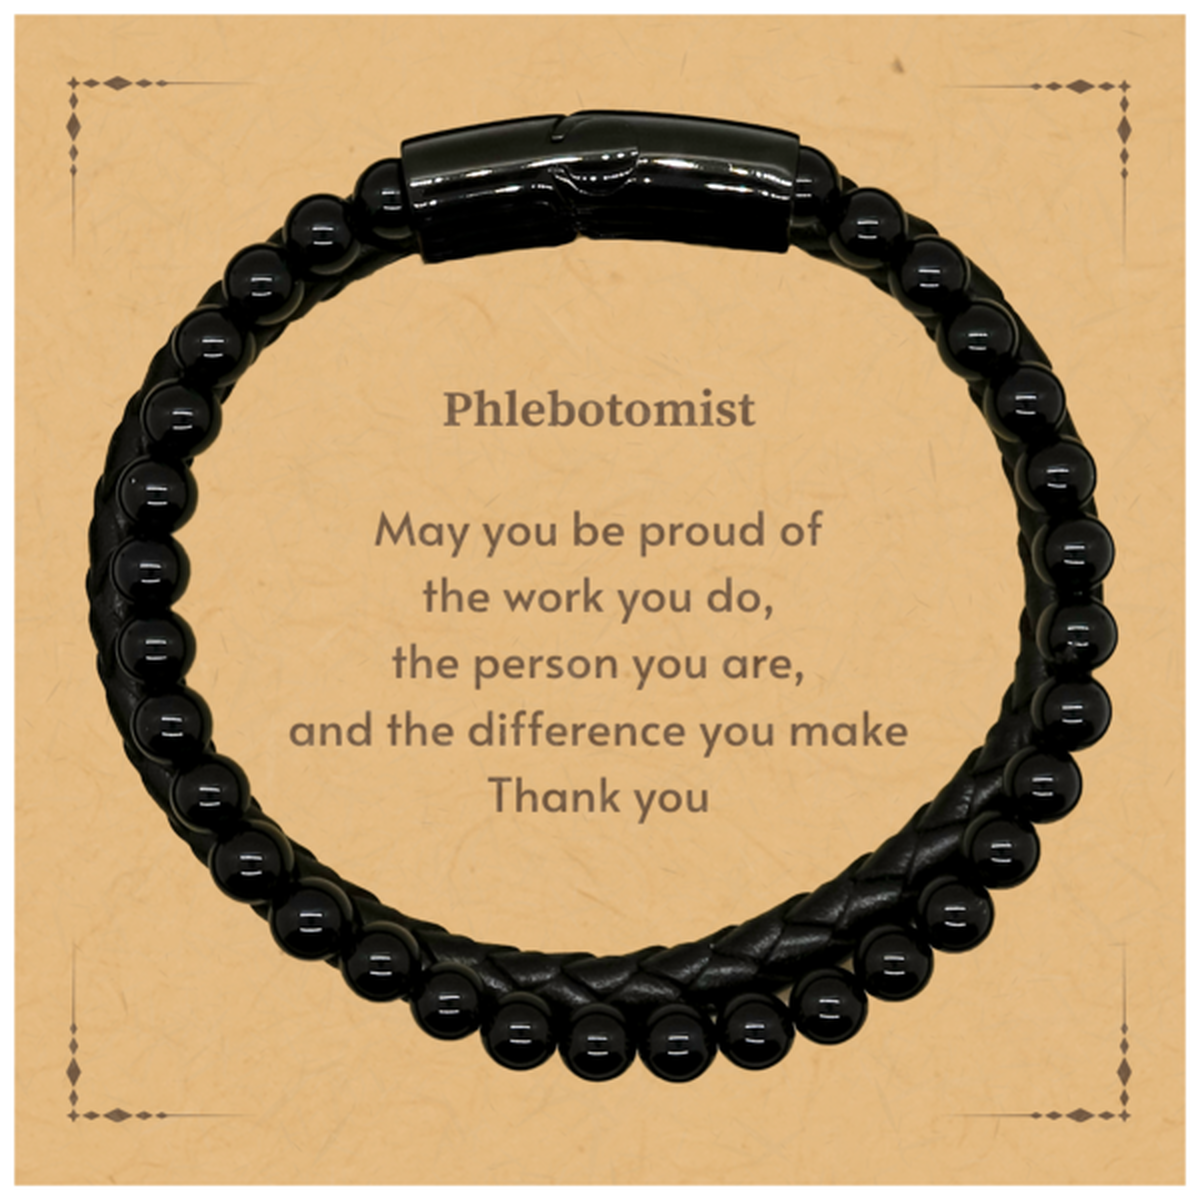 Heartwarming Stone Leather Bracelets Retirement Coworkers Gifts for Phlebotomist, Phlebotomist May You be proud of the work you do, the person you are Gifts for Boss Men Women Friends